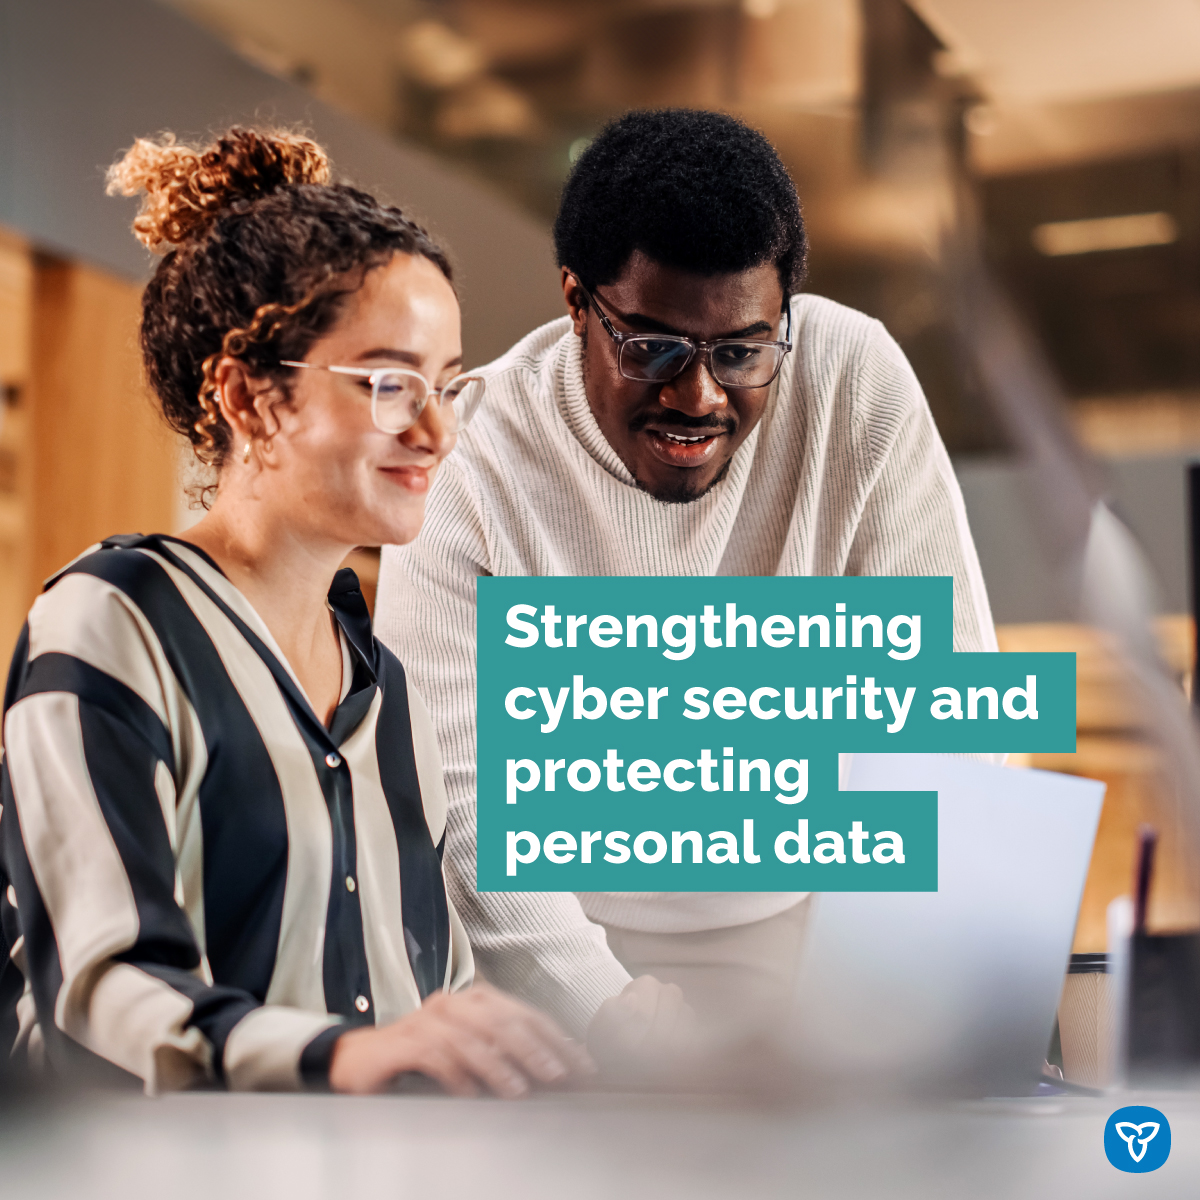 Exciting news! Our government is introducing legislation to enhance online protections for children. Safeguarding their data and privacy is crucial for a safe digital experience in provincial settings. Learn more: news.ontario.ca/en/release/100…